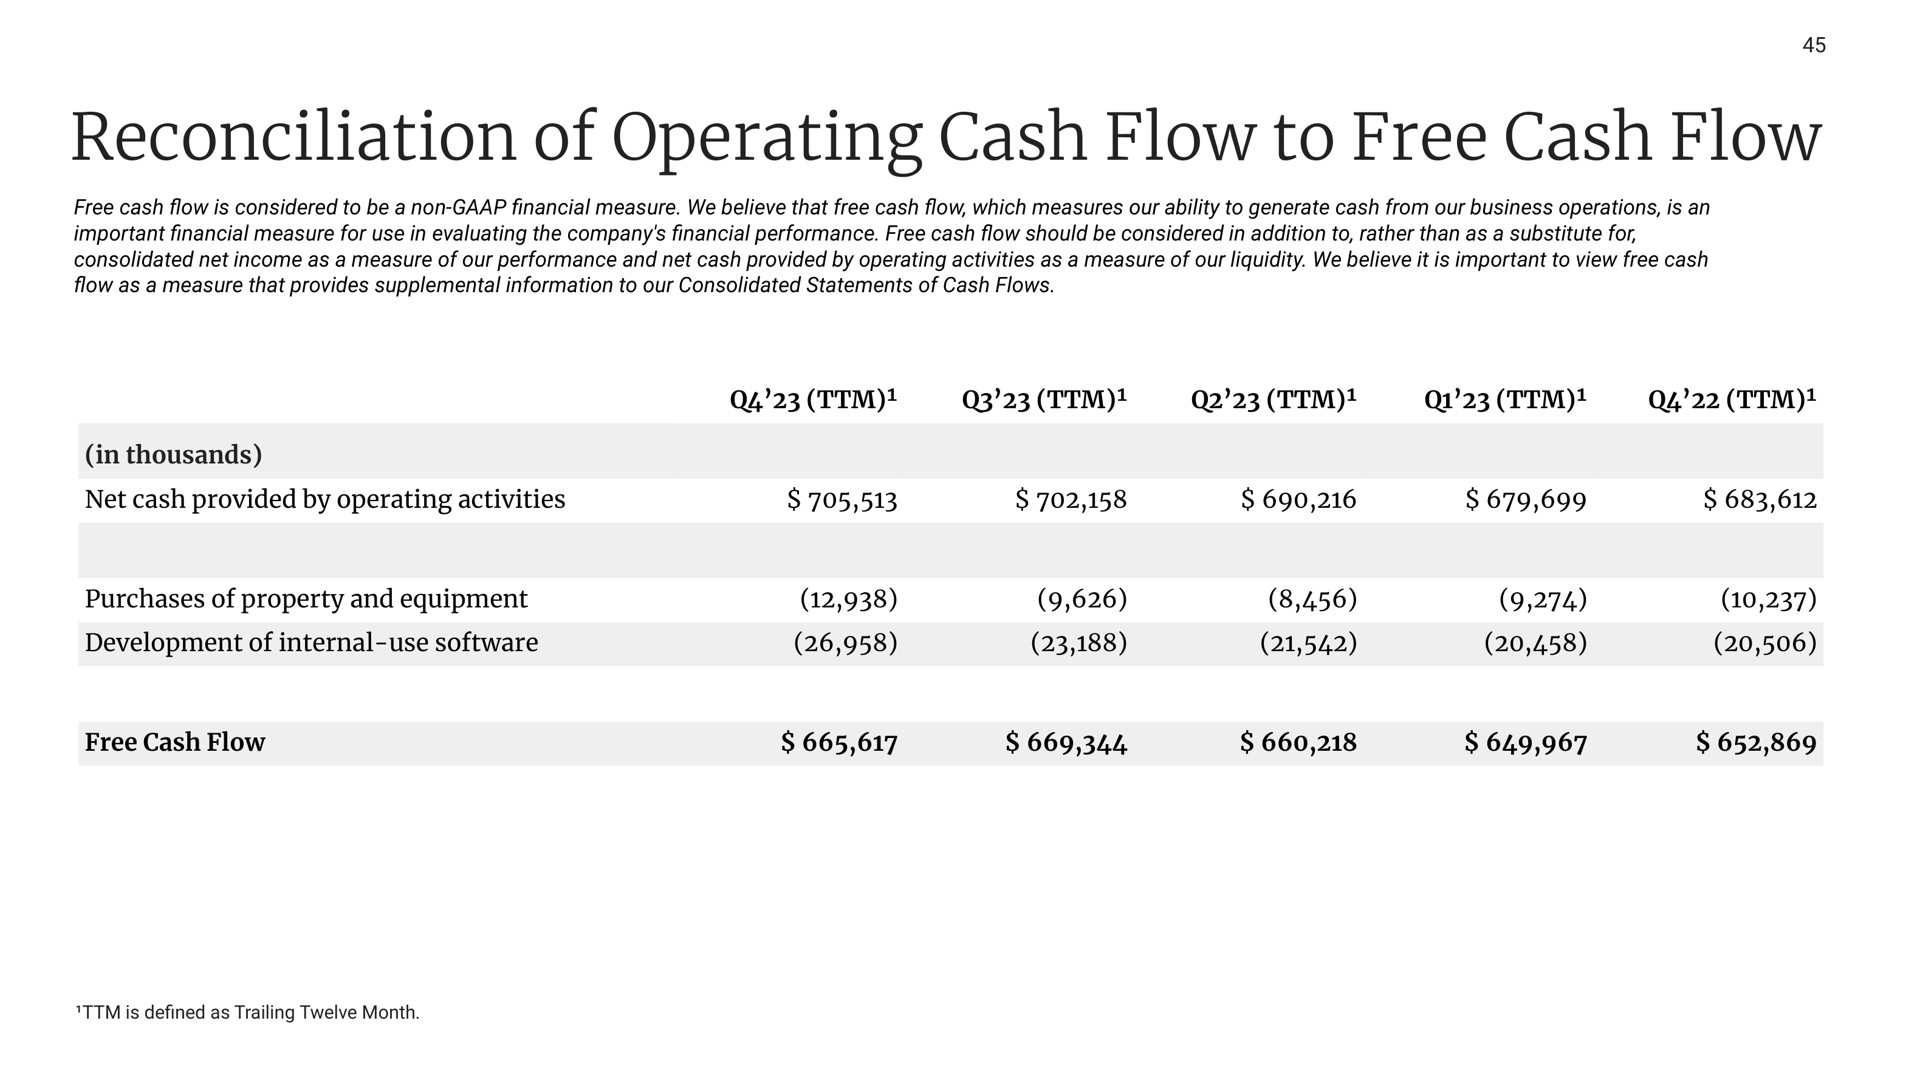 reconciliation of operating cash flow to free cash flow | Etsy